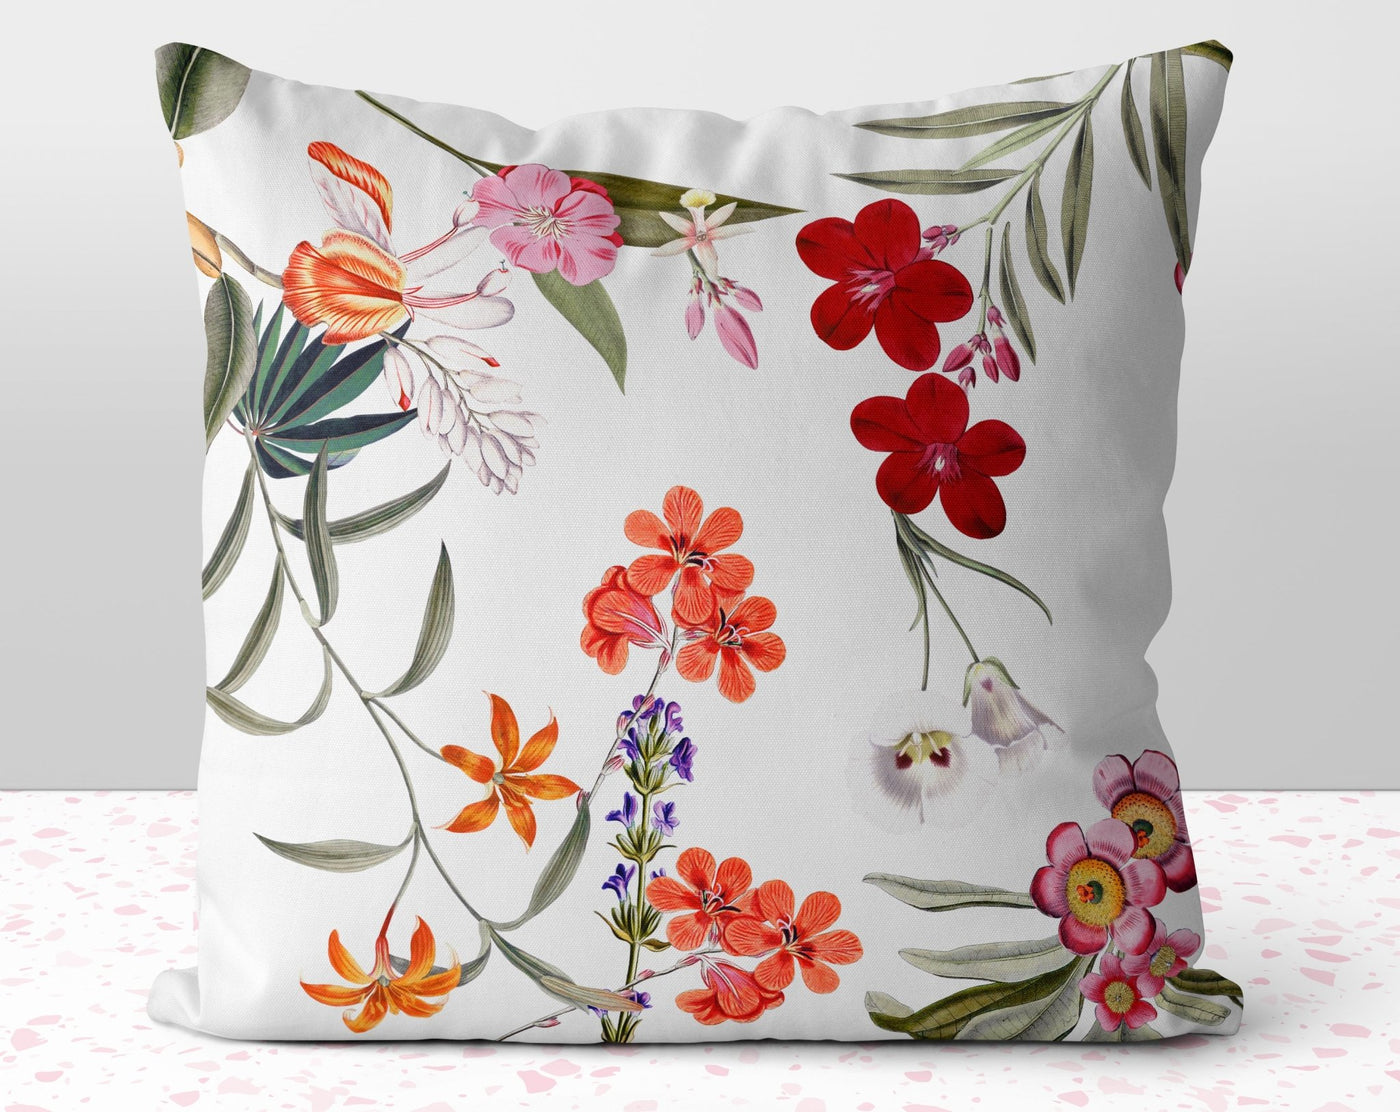 Fresh Floral Flowers on White Pillow Throw Cover with Insert - Cush Potato Pillows